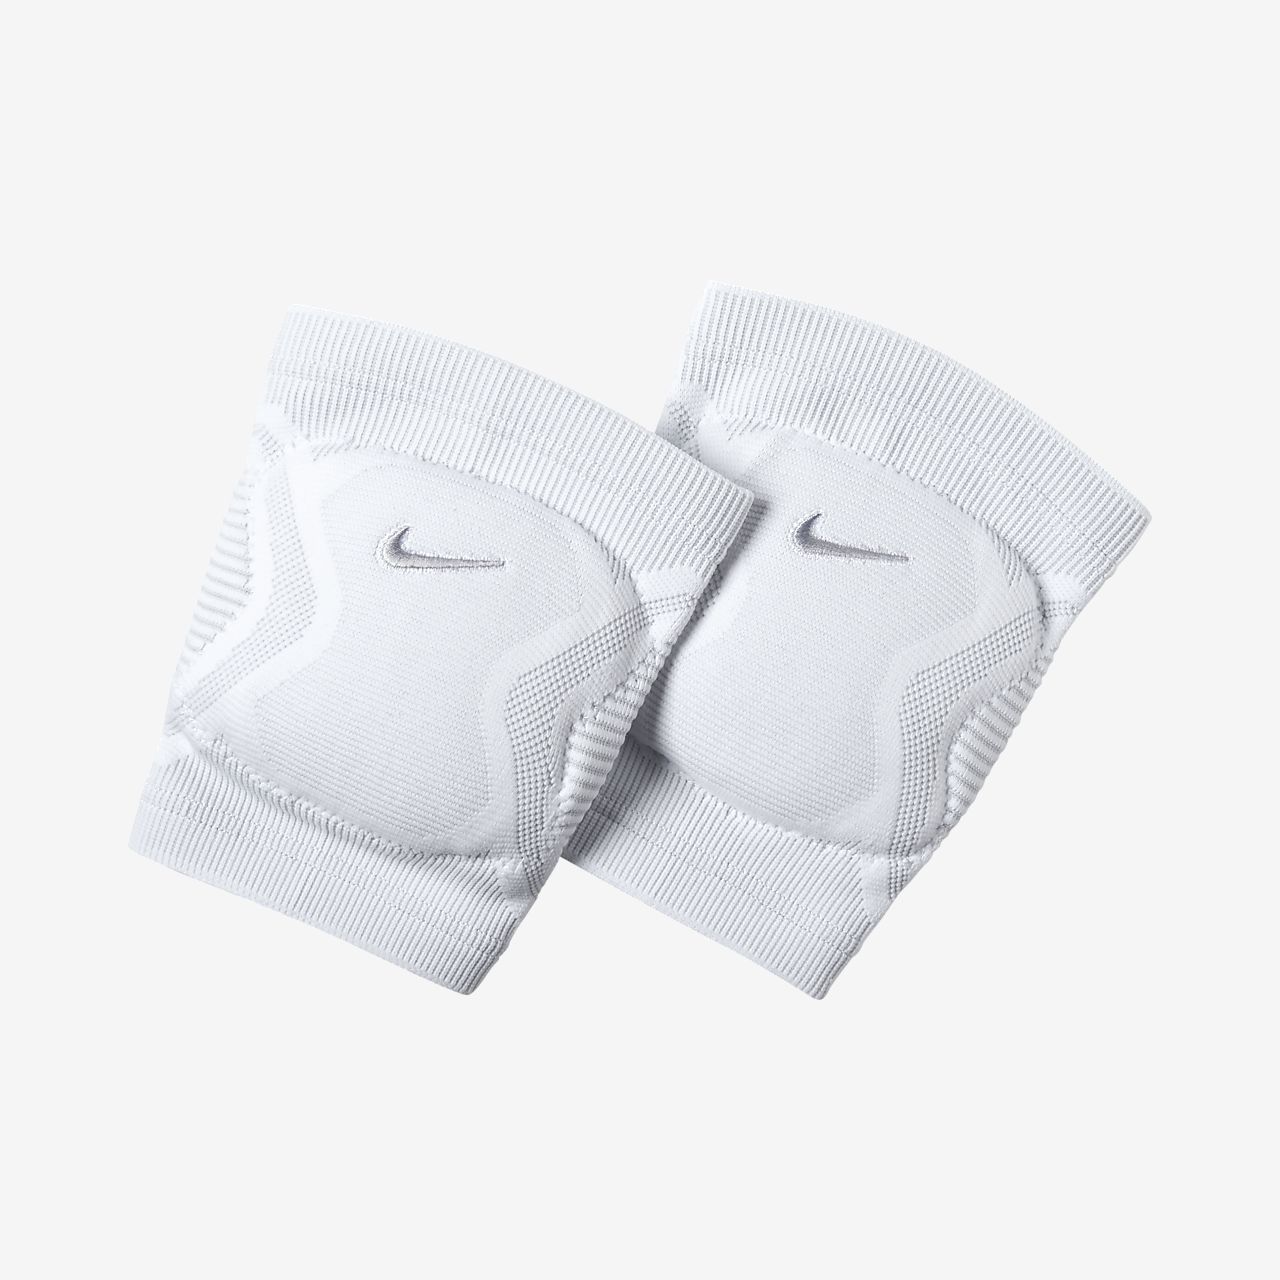 nike knee support